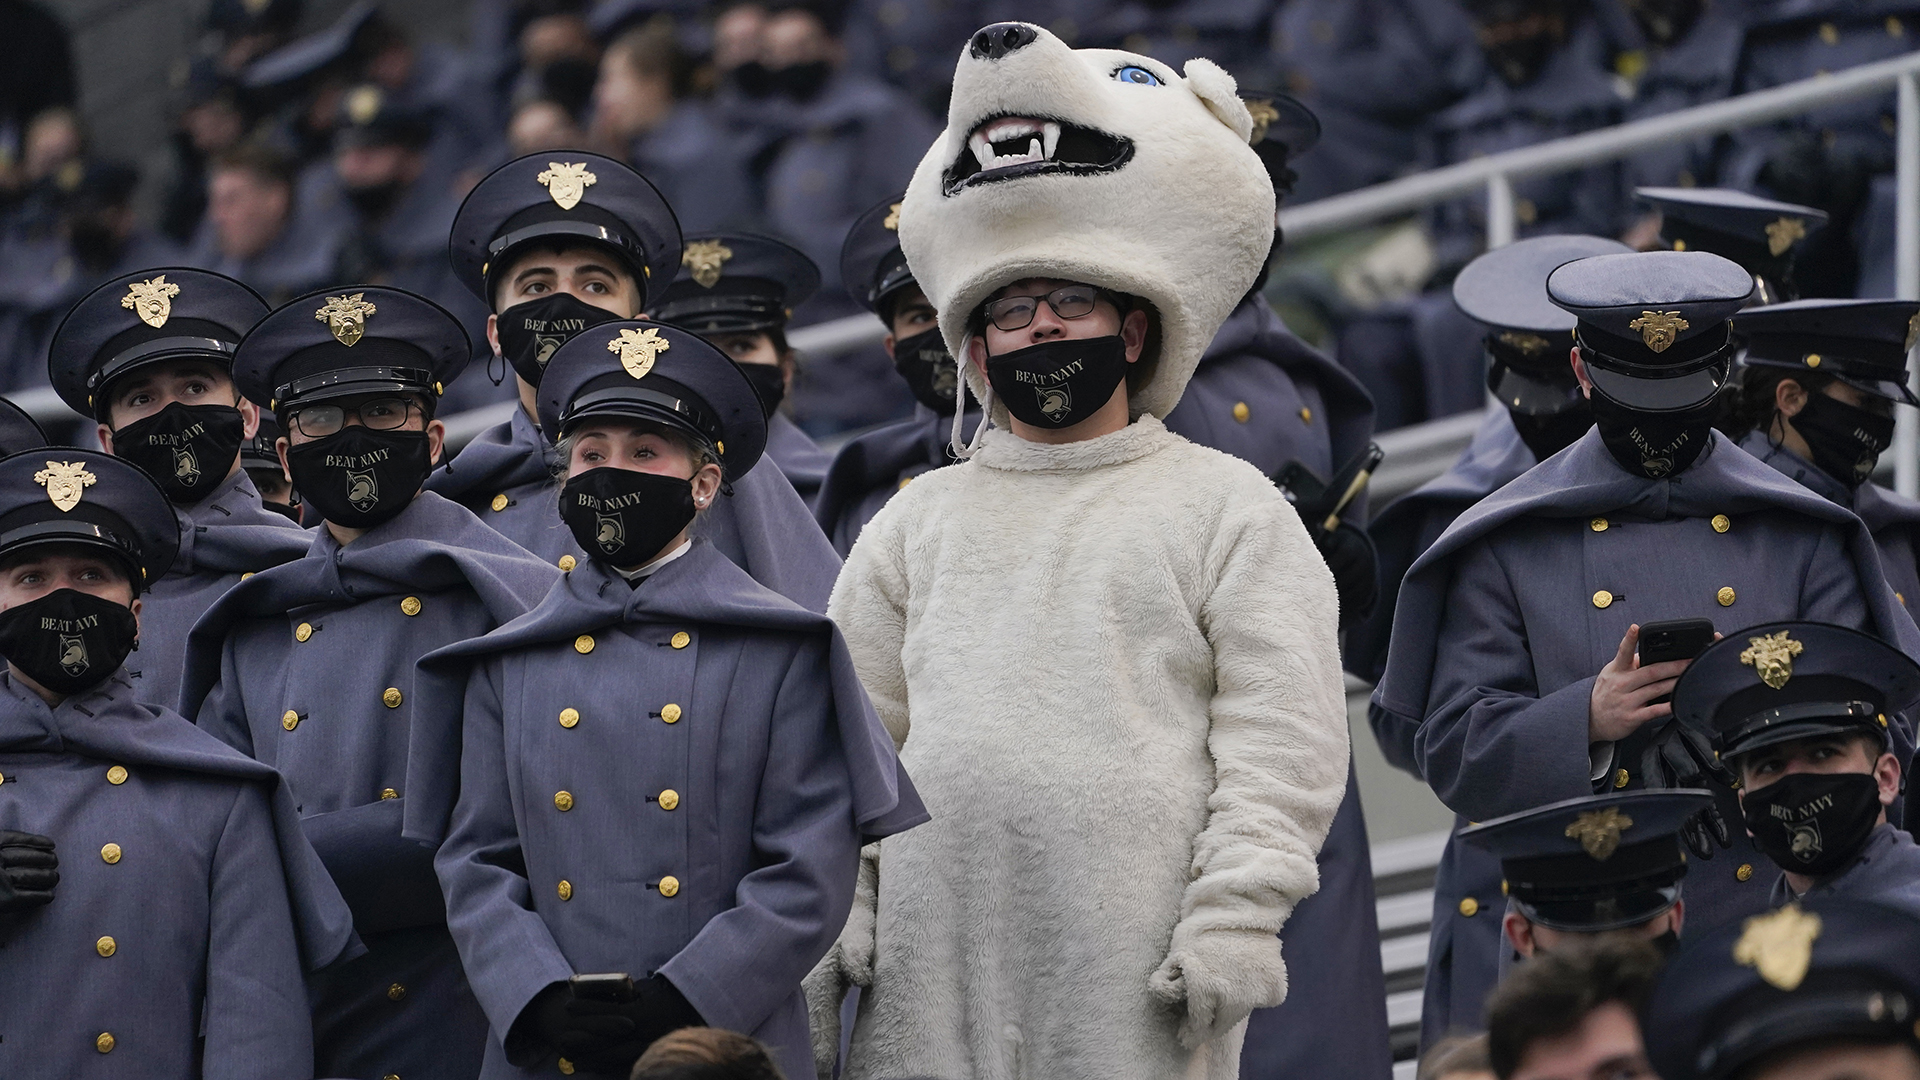 army navy game thanksgiving